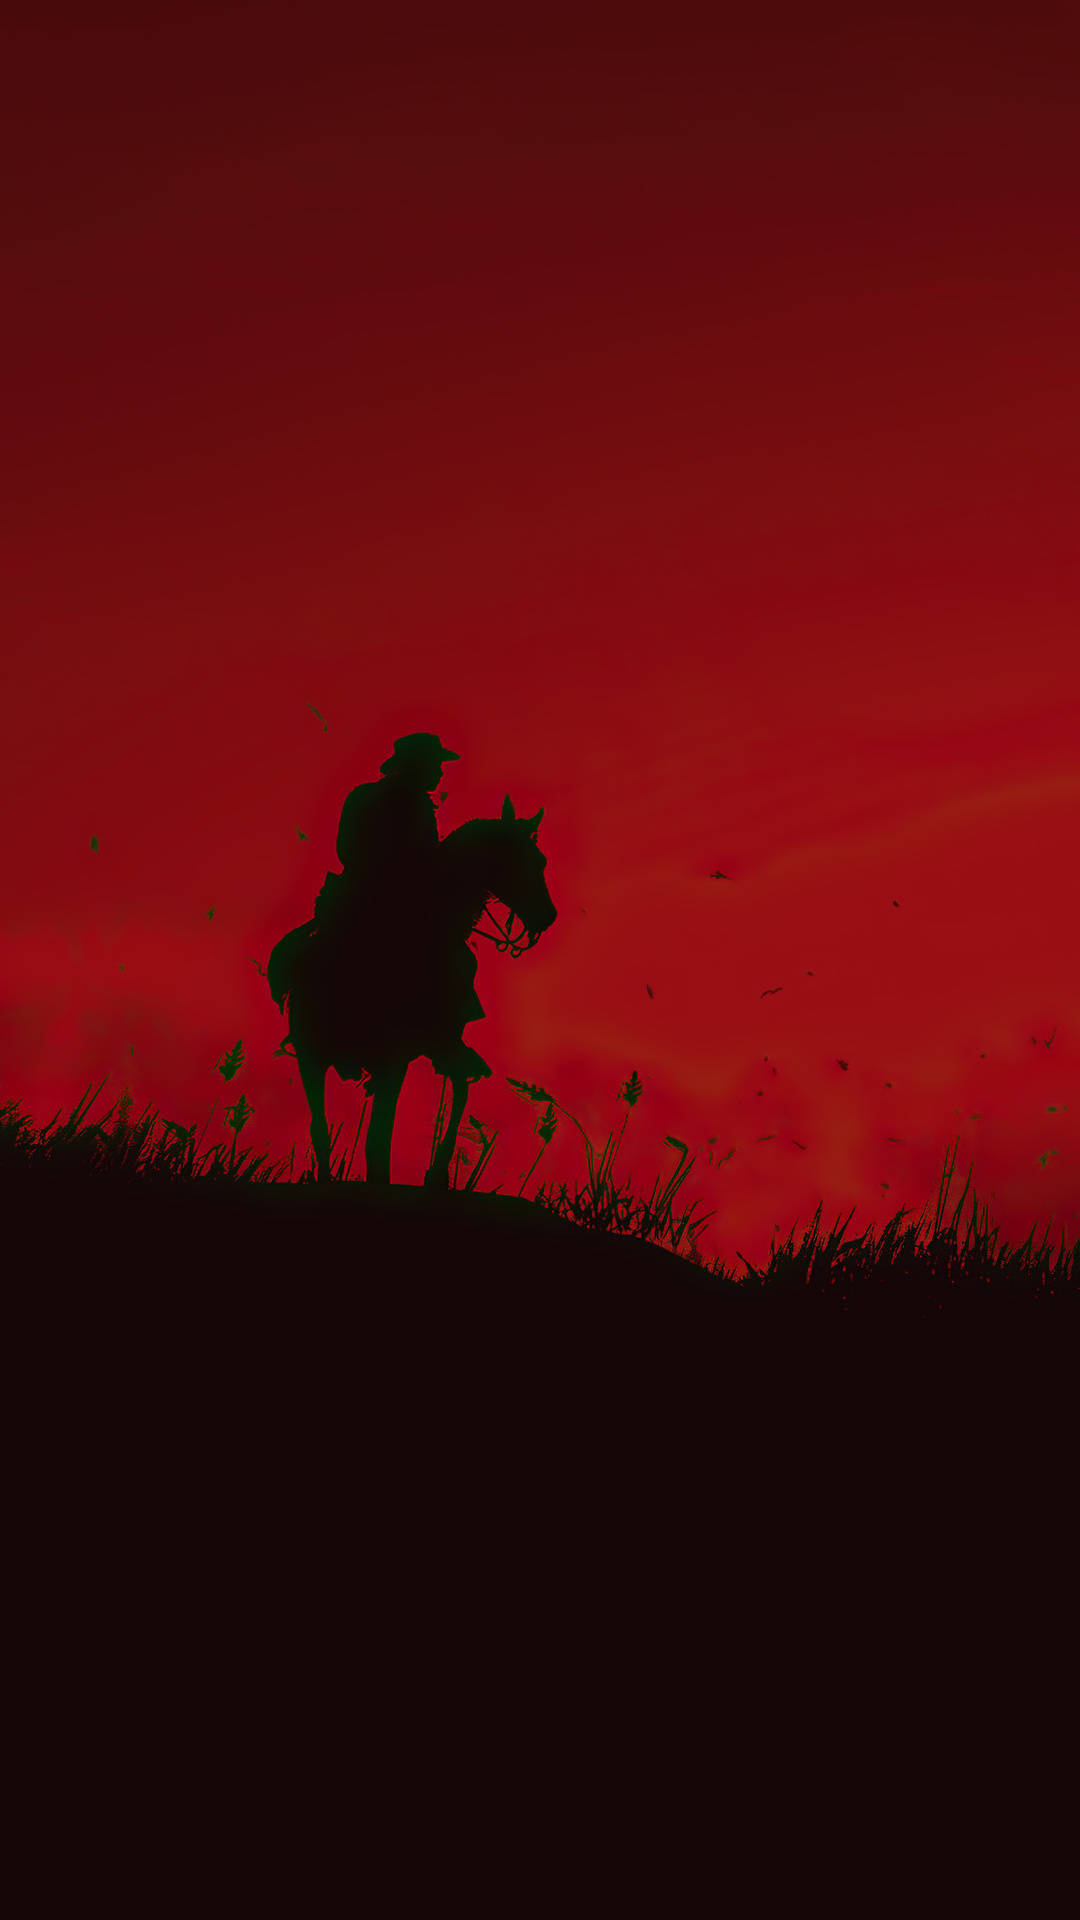 Free Red Dead Redemption Ii Phone Wallpaper Downloads, [100+] Red Dead  Redemption Ii Phone Wallpapers for FREE 